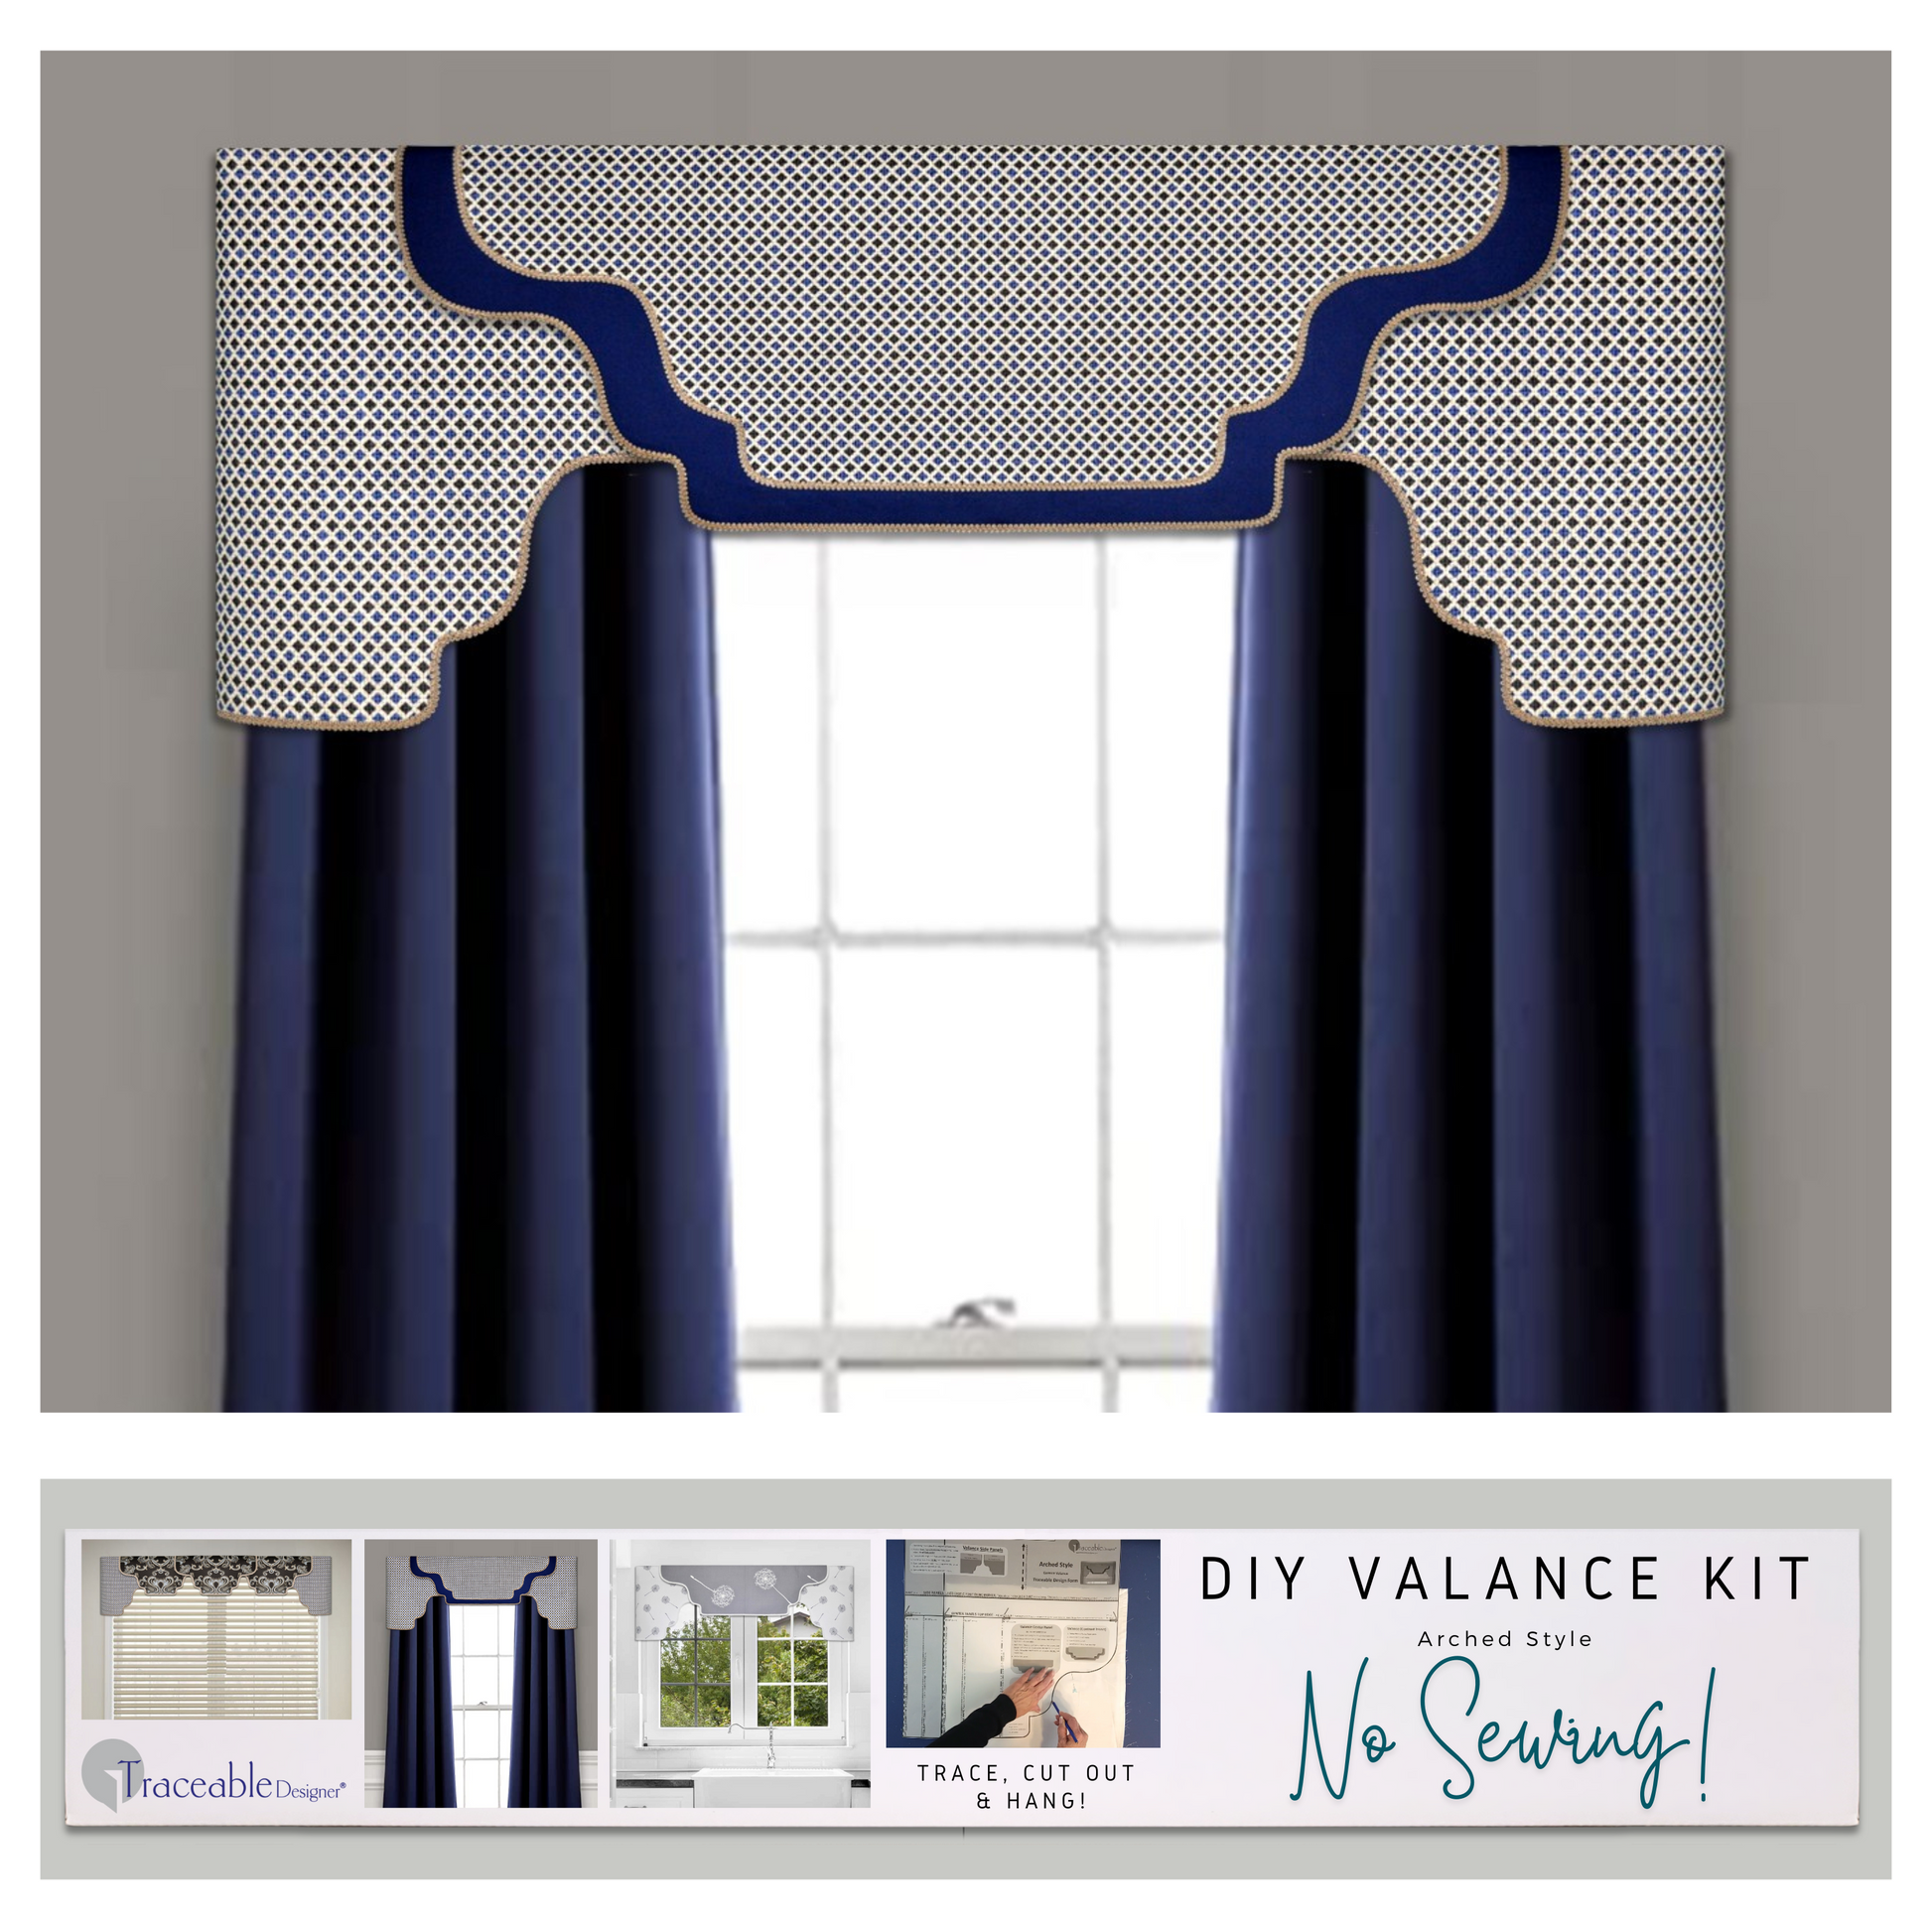 Traceable Designer arched style no-sew cornice valance kit inlcudes traceable valance design forms used to make custom valances without sewing. Use a 2.5" wide pocket curtain rod.